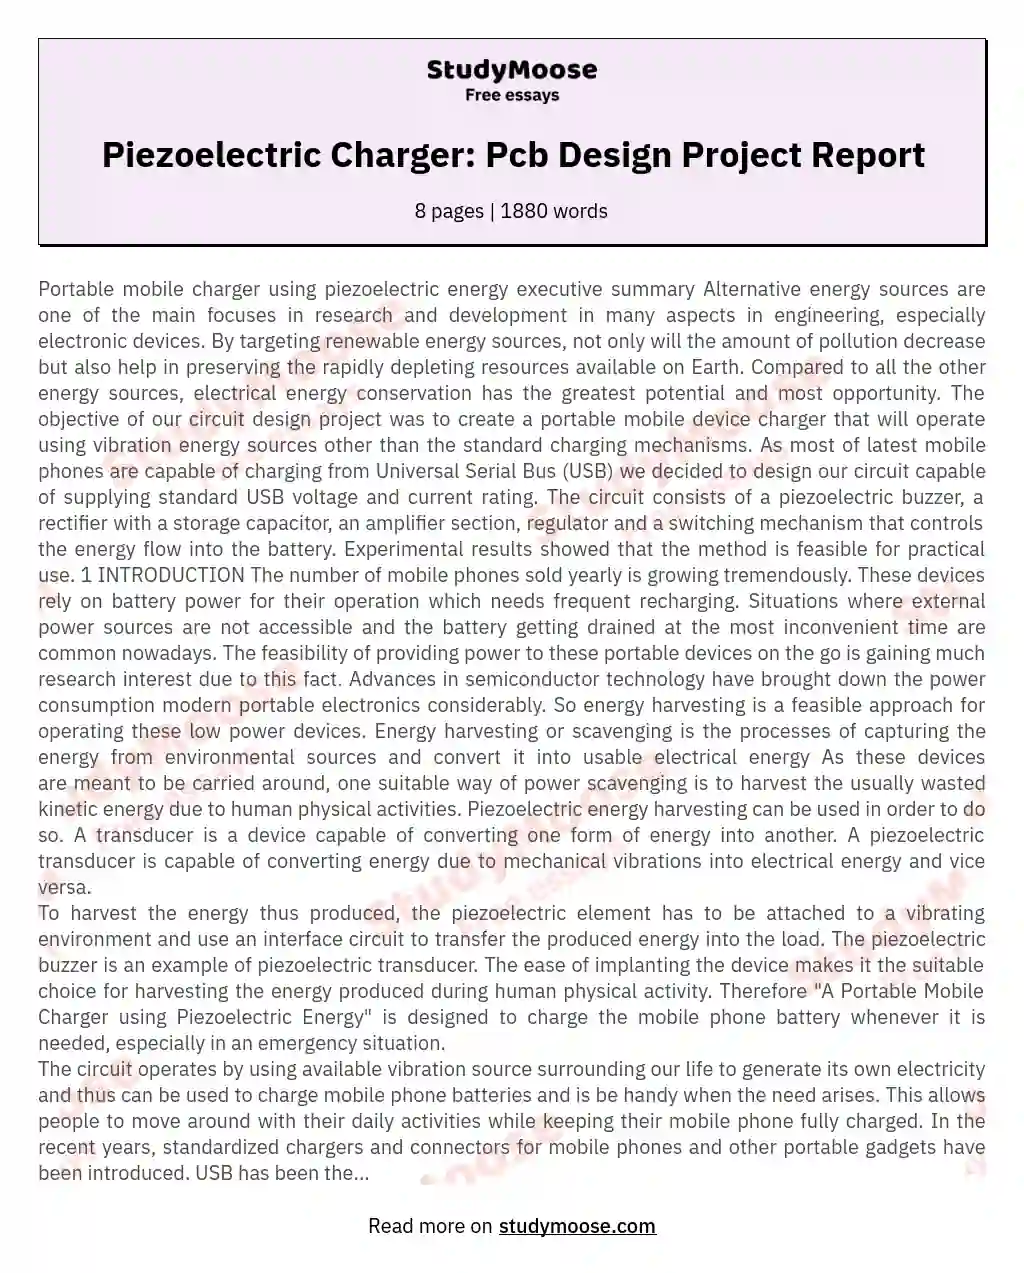 Piezoelectric Charger: Pcb Design Project Report essay